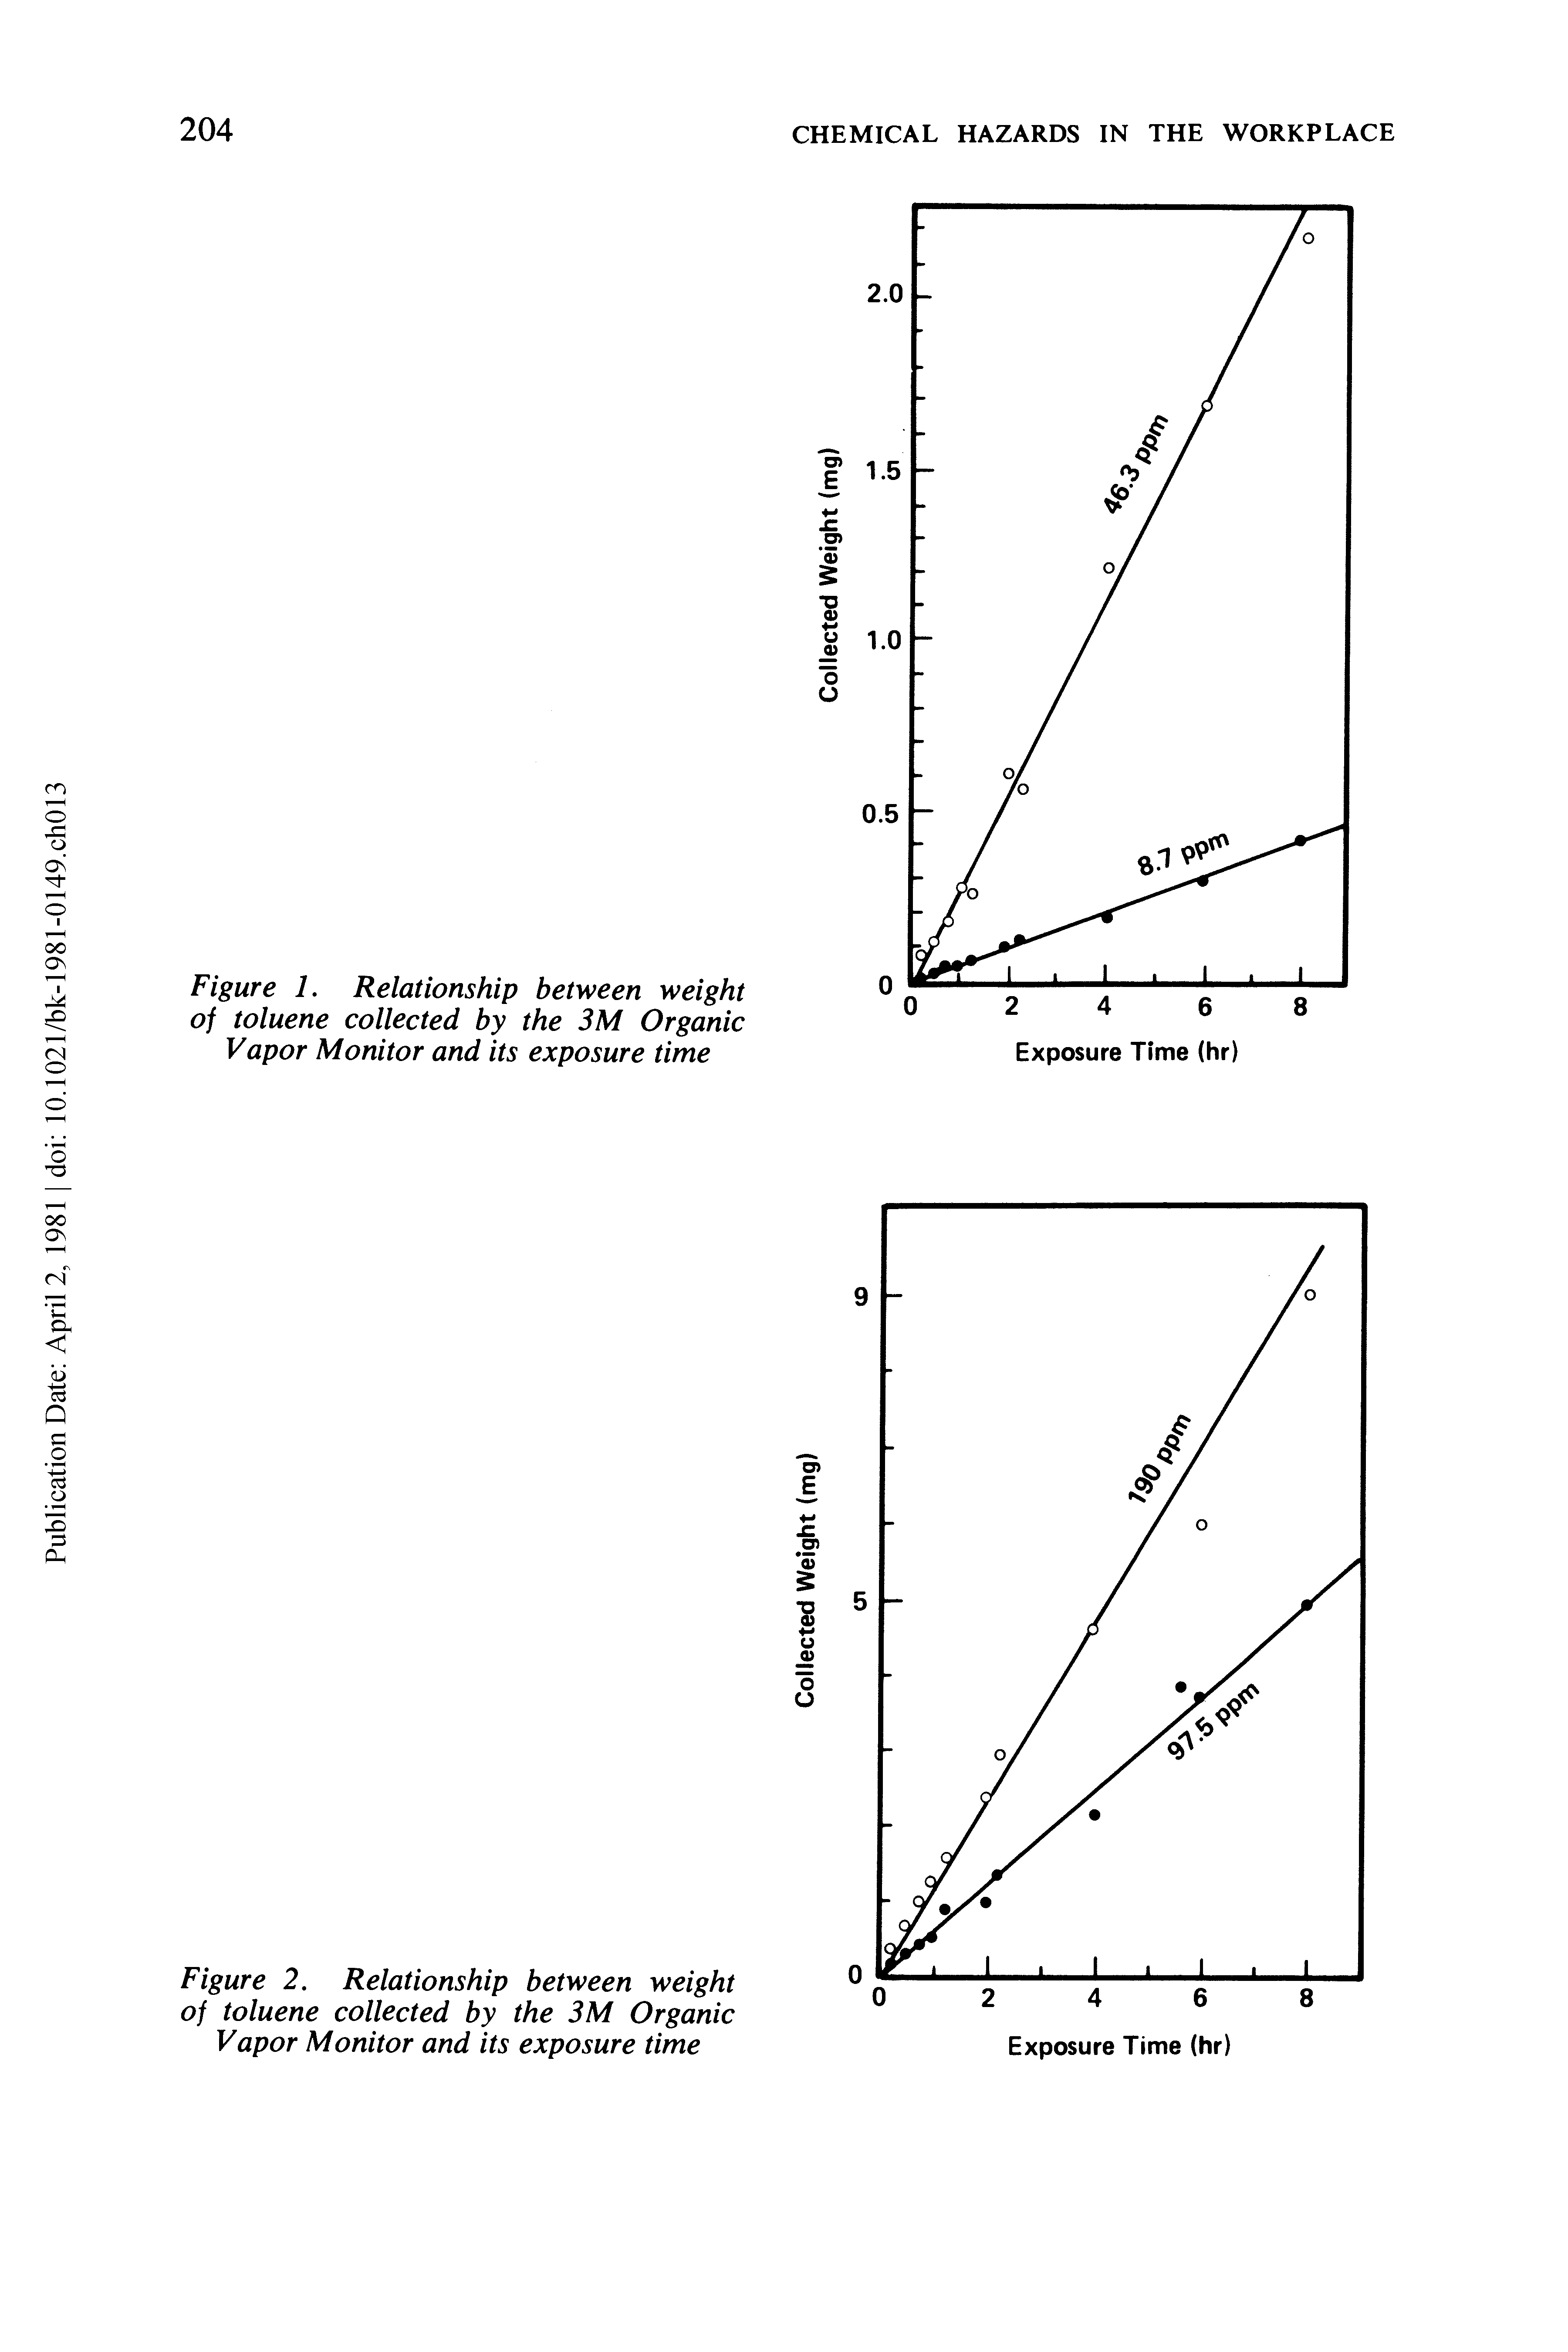 Figure 1. Relationship between weight of toluene collected by the 3M Organic Vapor Monitor and its exposure time...